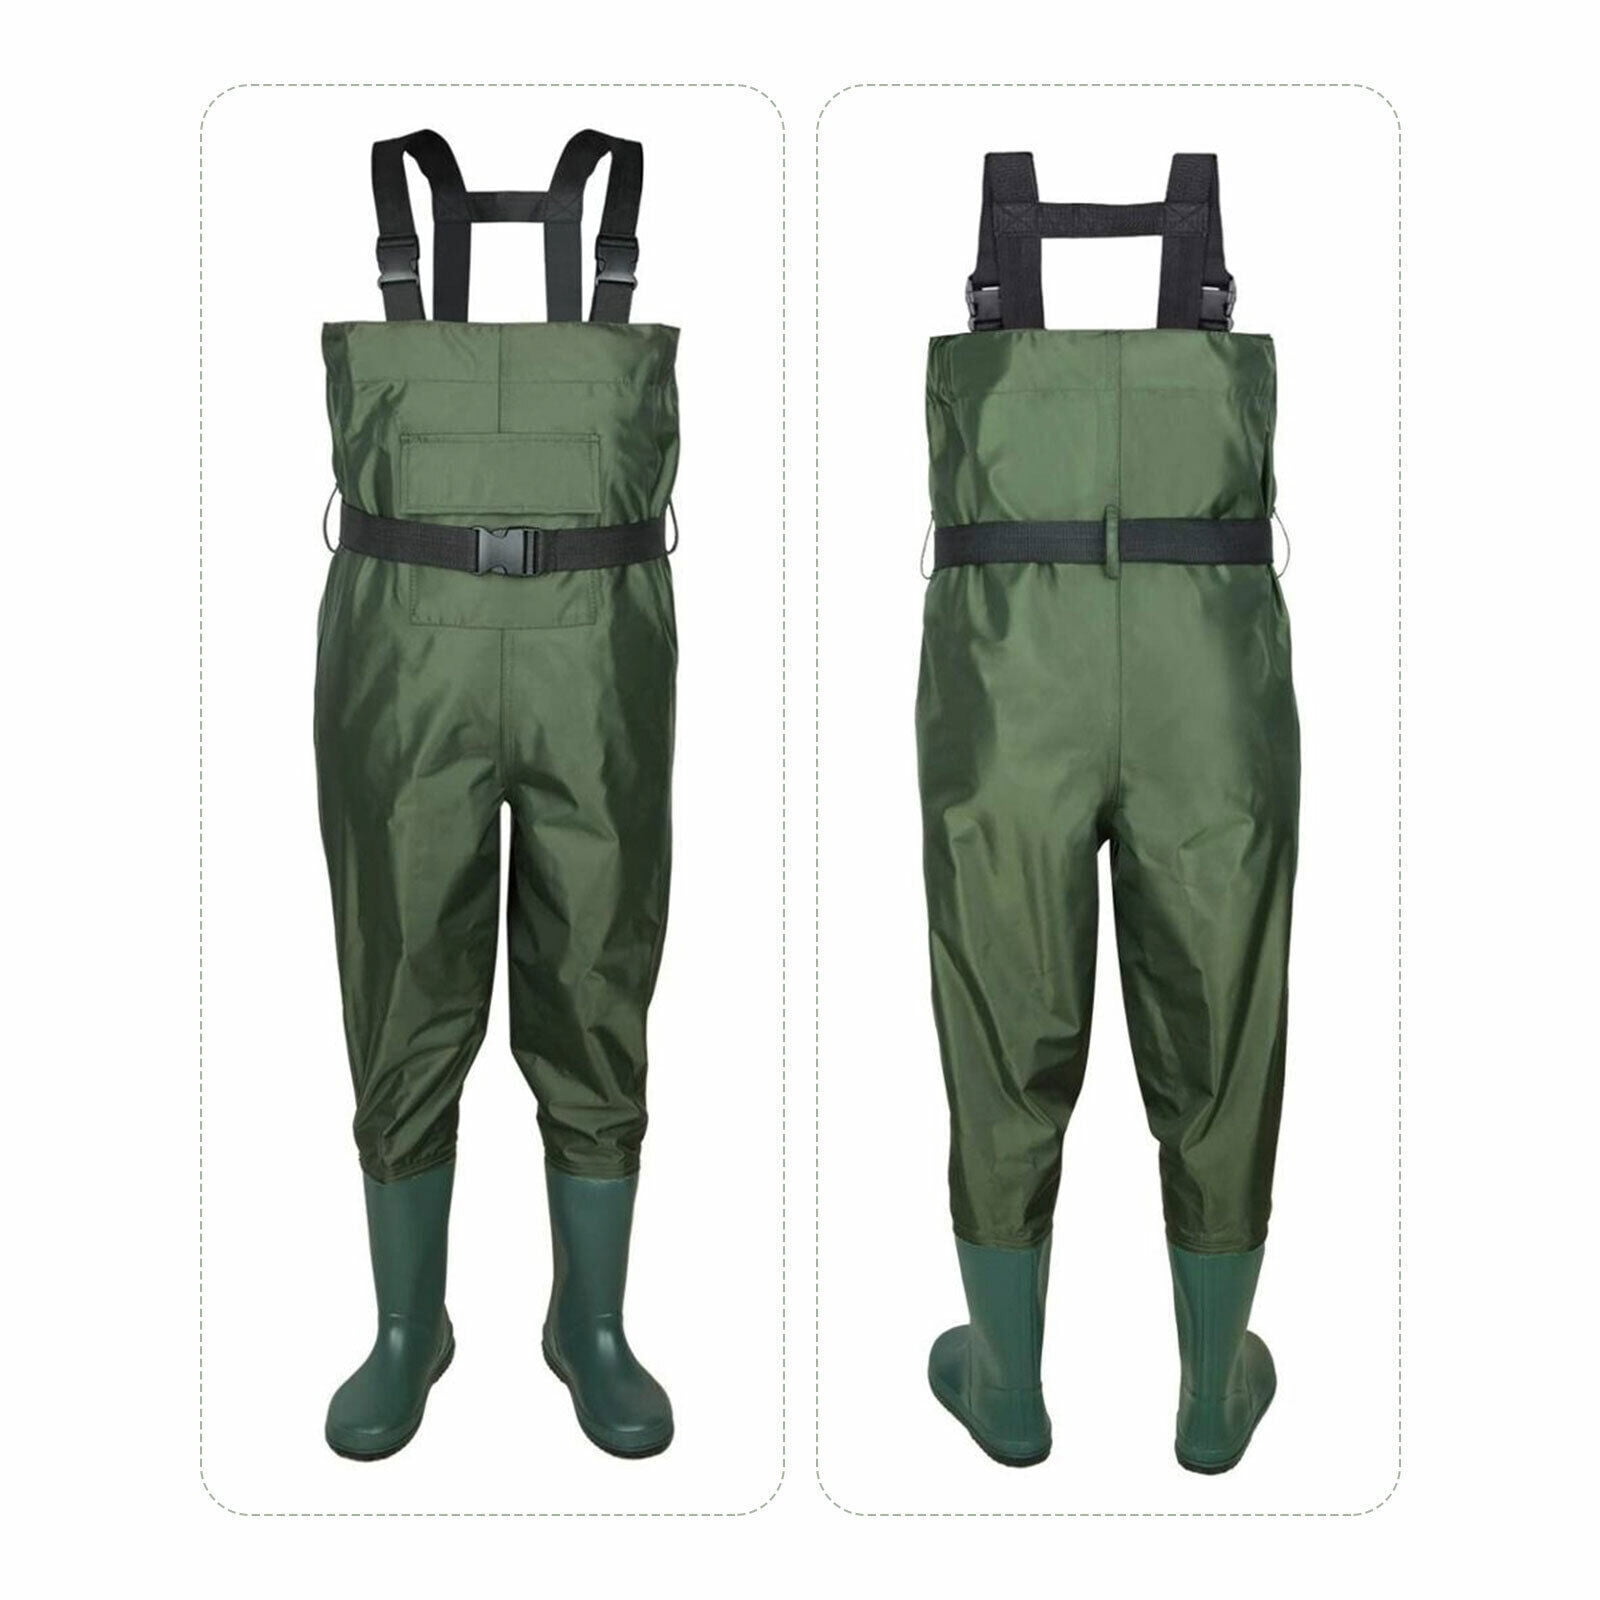 Wsyw Waterproof Chest Waders Nylon 2-Ply Rubber Bootfoot for Hunting Fishing Green US Size 6, adult Unisex, Size: US 6